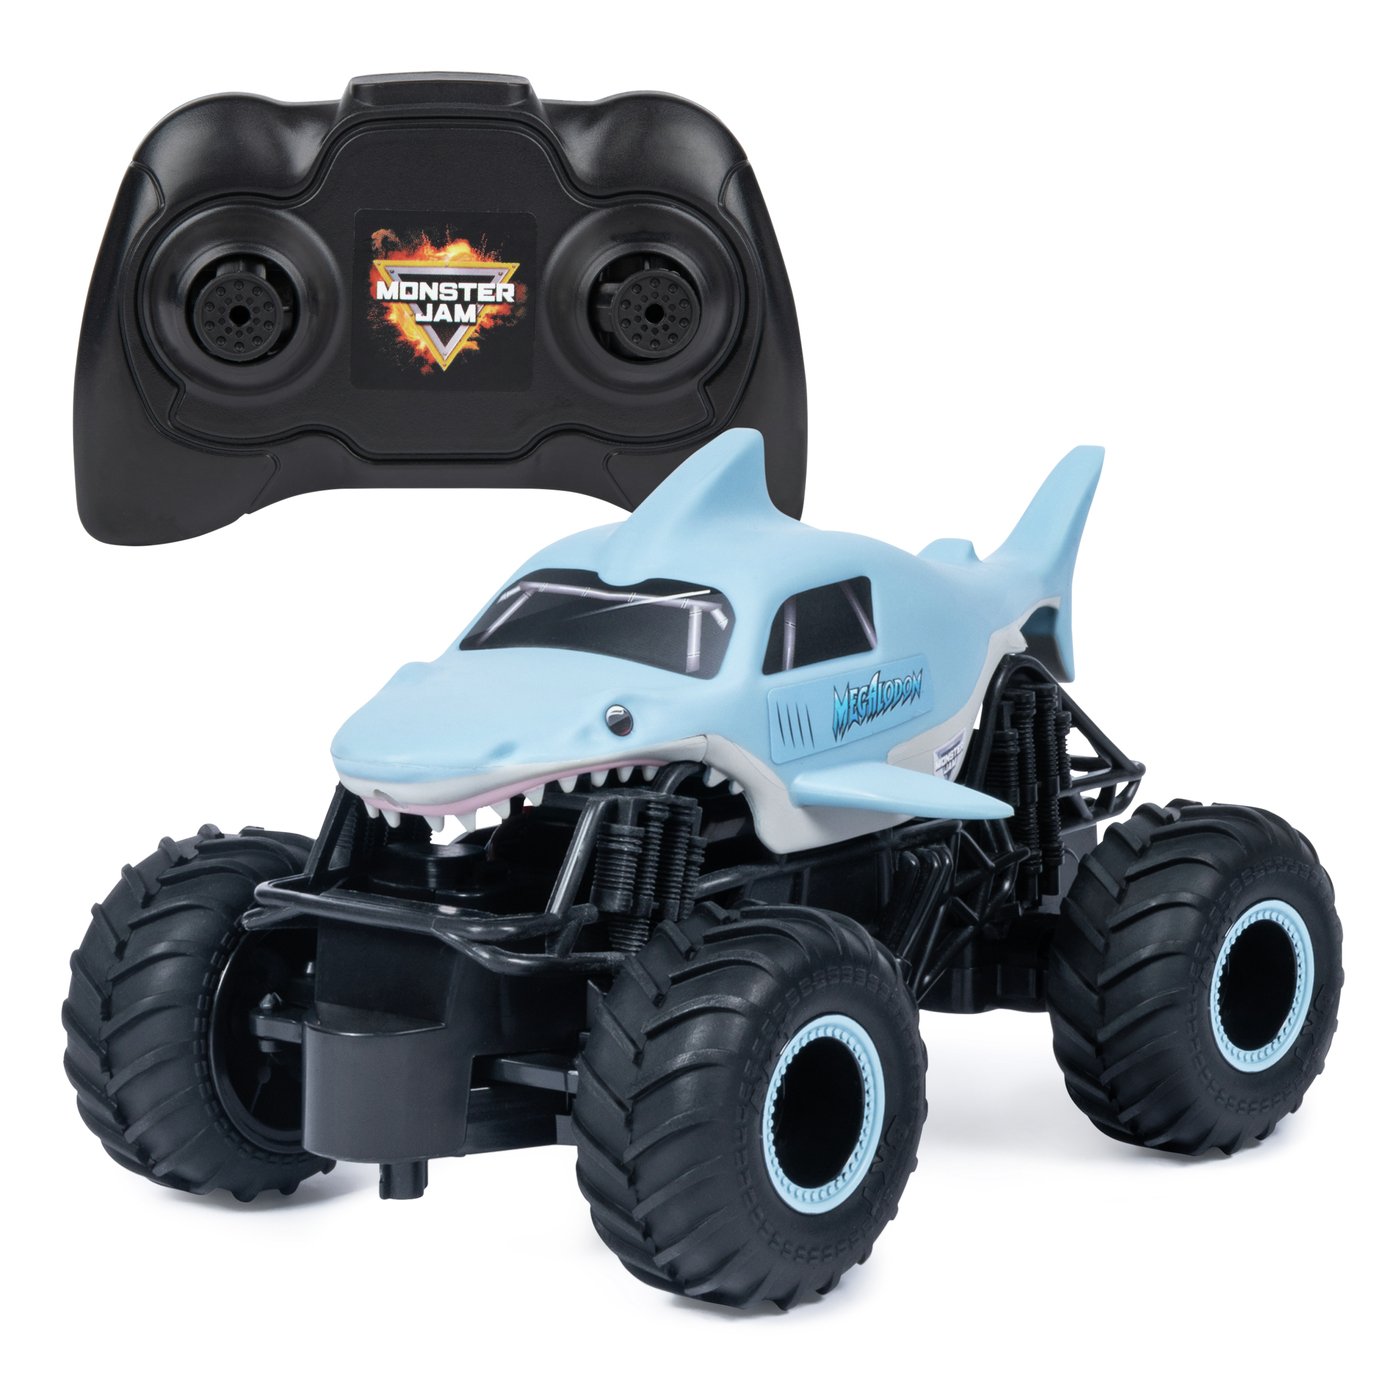 Monster Jam Megalodon 1:24 Radio Controlled Truck review